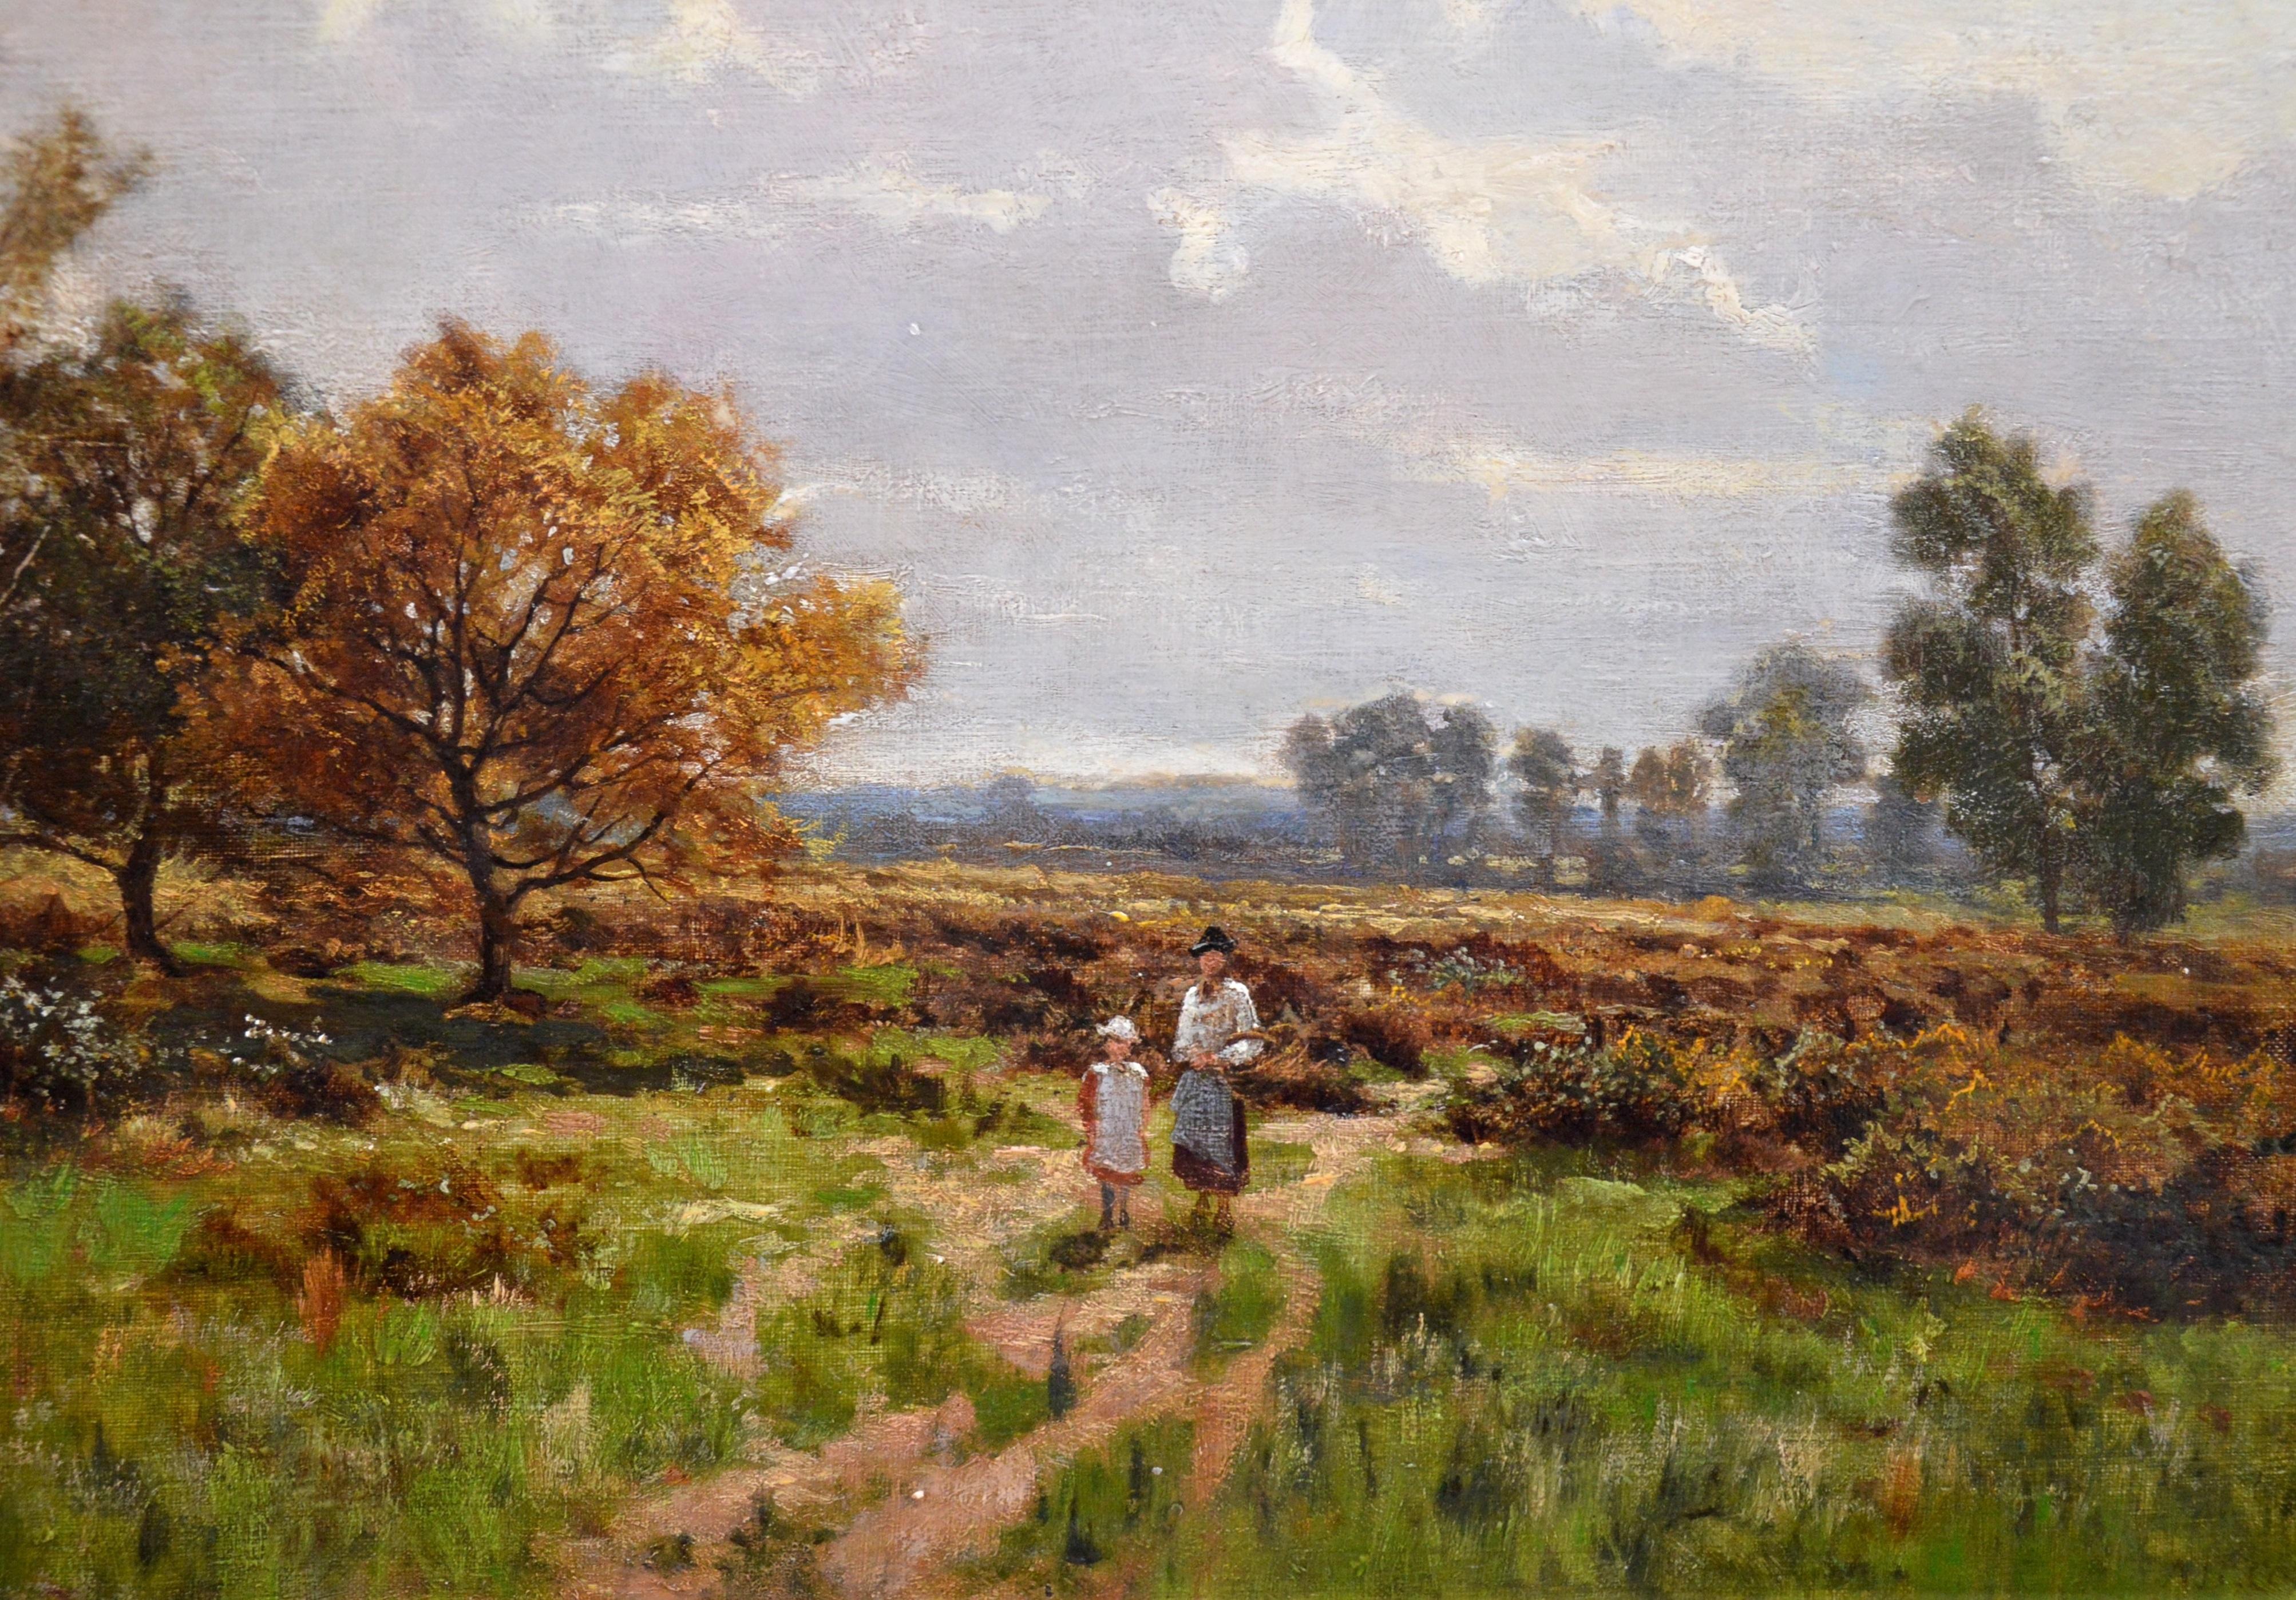 This is a fine 19th century oil on canvas depicting a mother and daughter crossing a field in summertime ‘Near Stratford Upon Avon’ by the listed Victorian landscape painter Arthur Bevan Collier 1832-1909. The painting is signed by the artist and